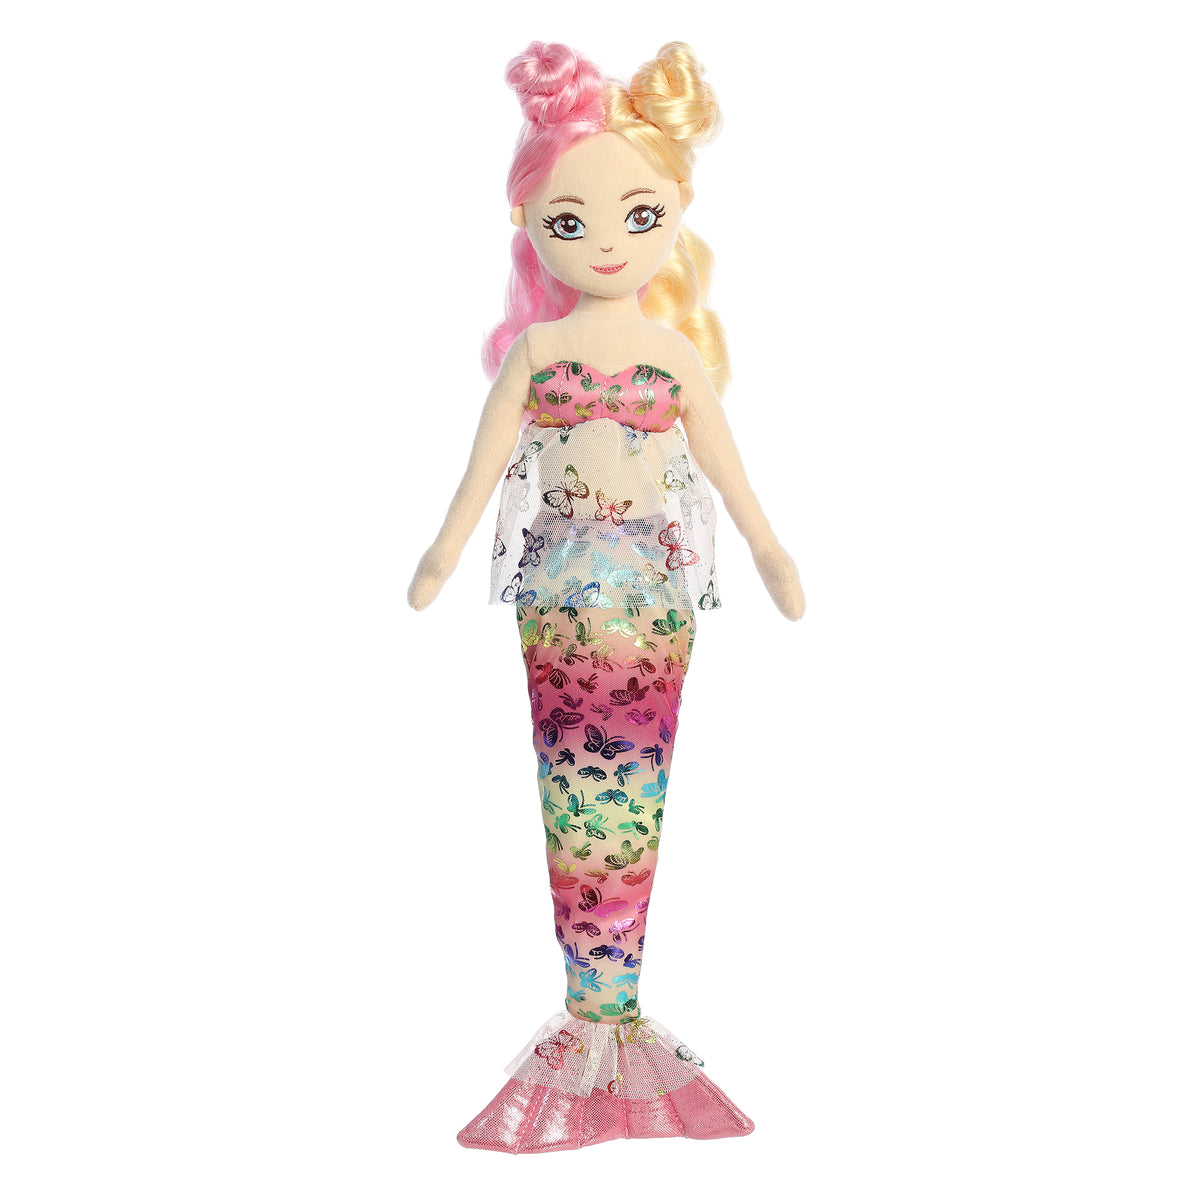 Mermaid plush with radiant tail shimmering in rainbow hues, capturing the enchantment of the Sea Sparkles collection.